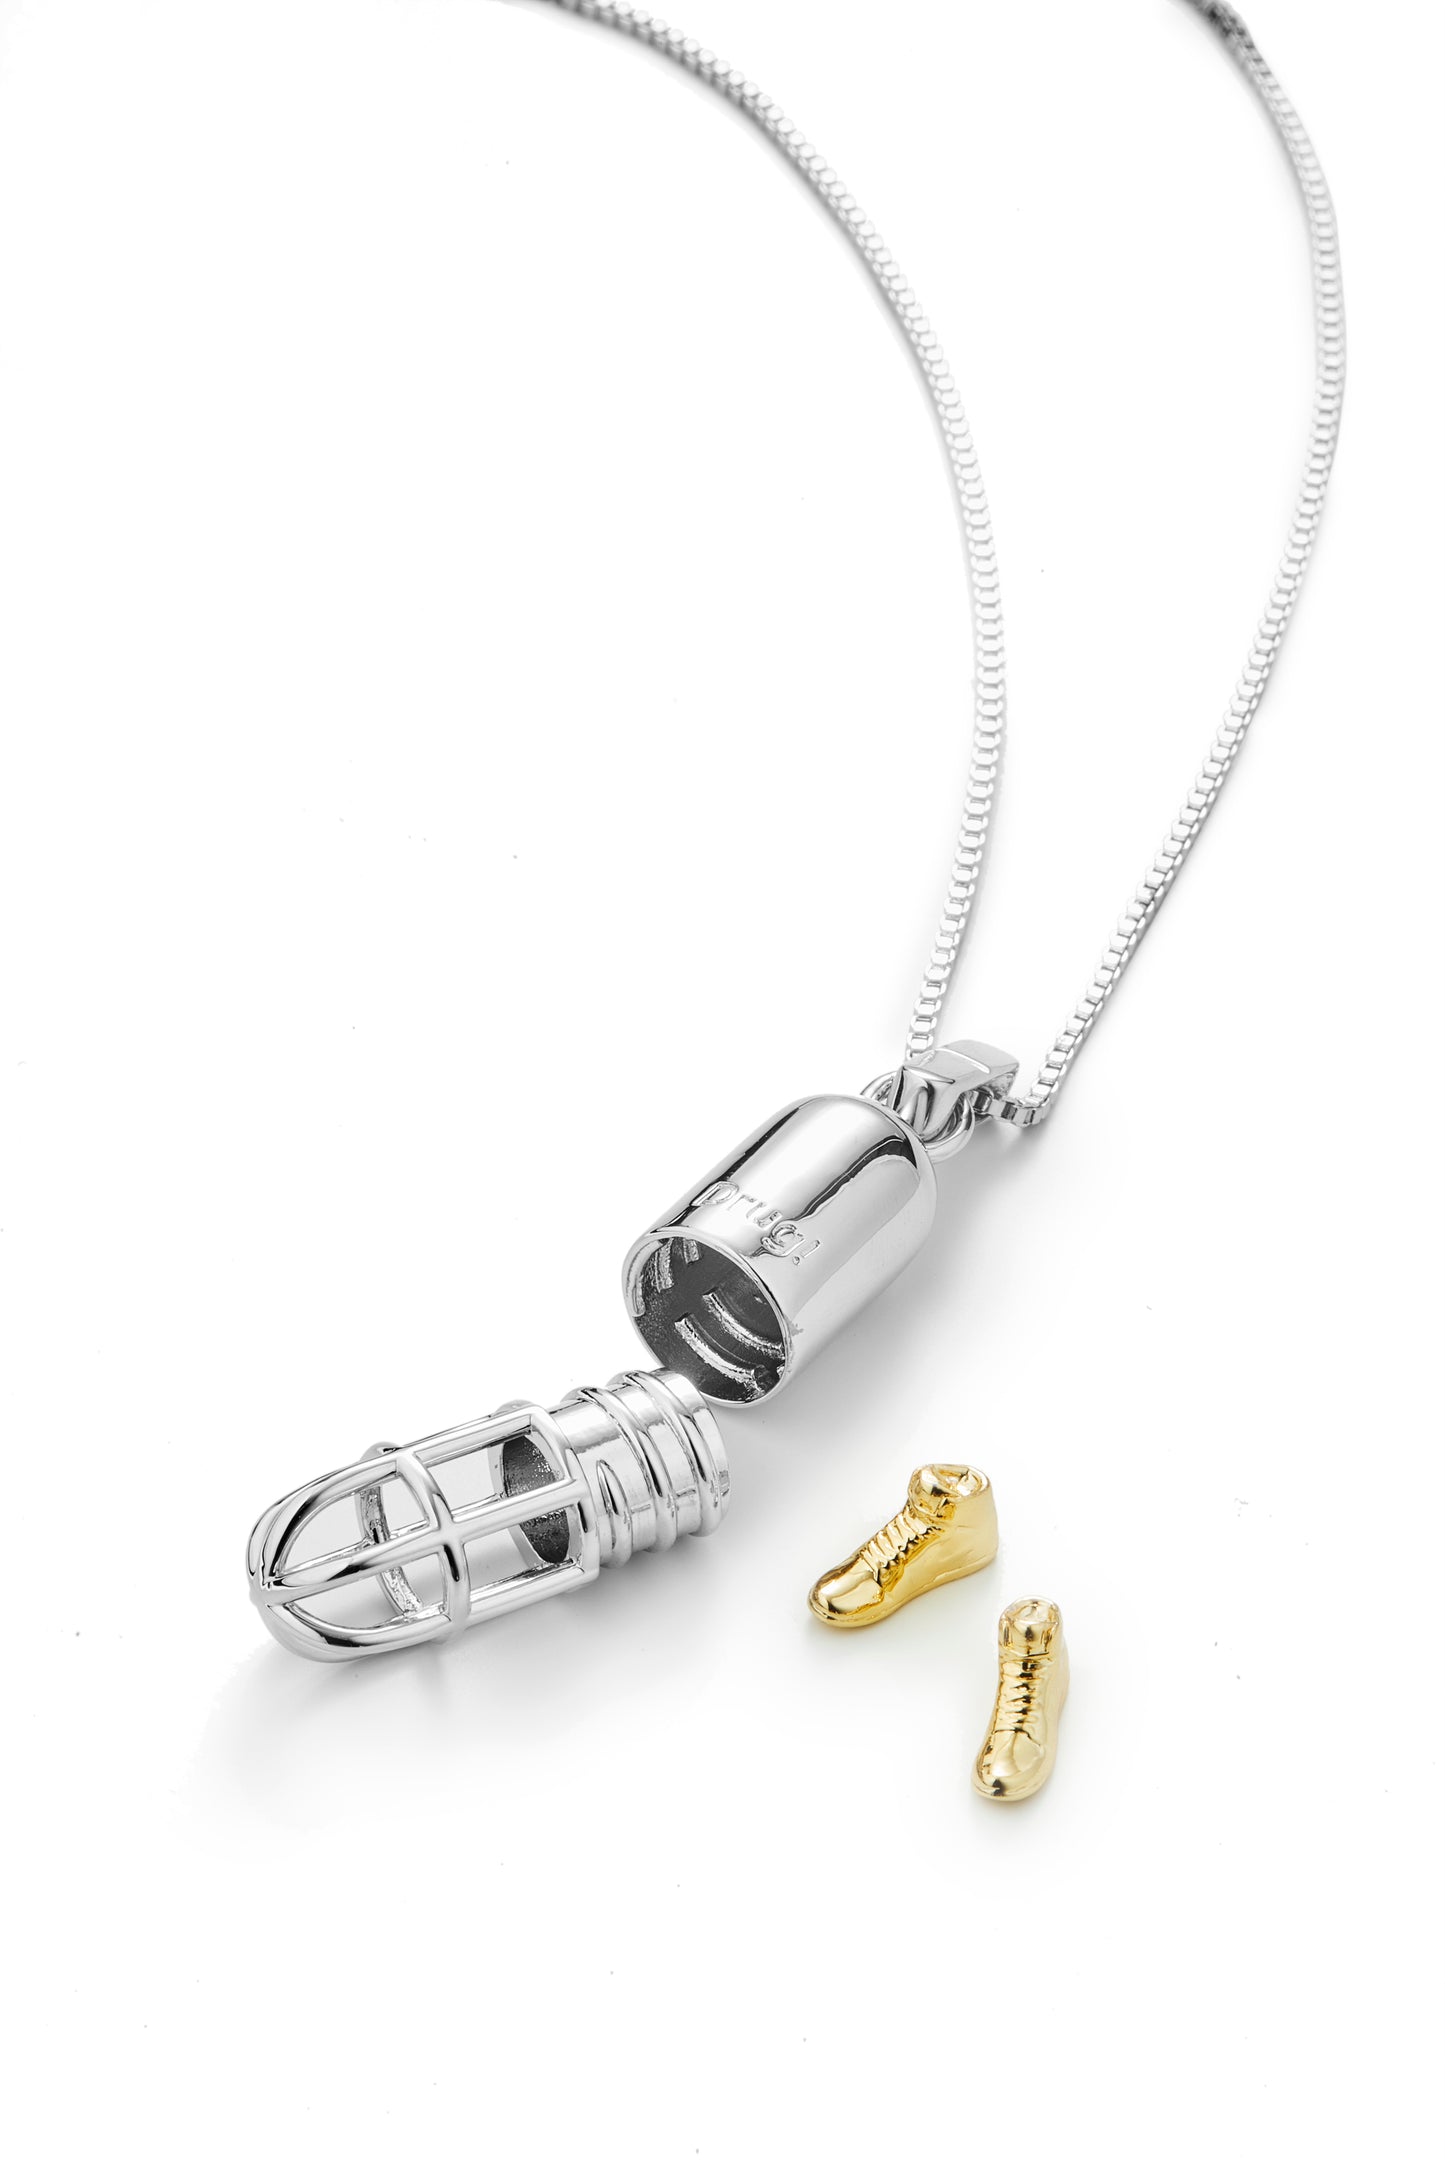 Collaboration Series - Horm-1*Drug Pill Necklace